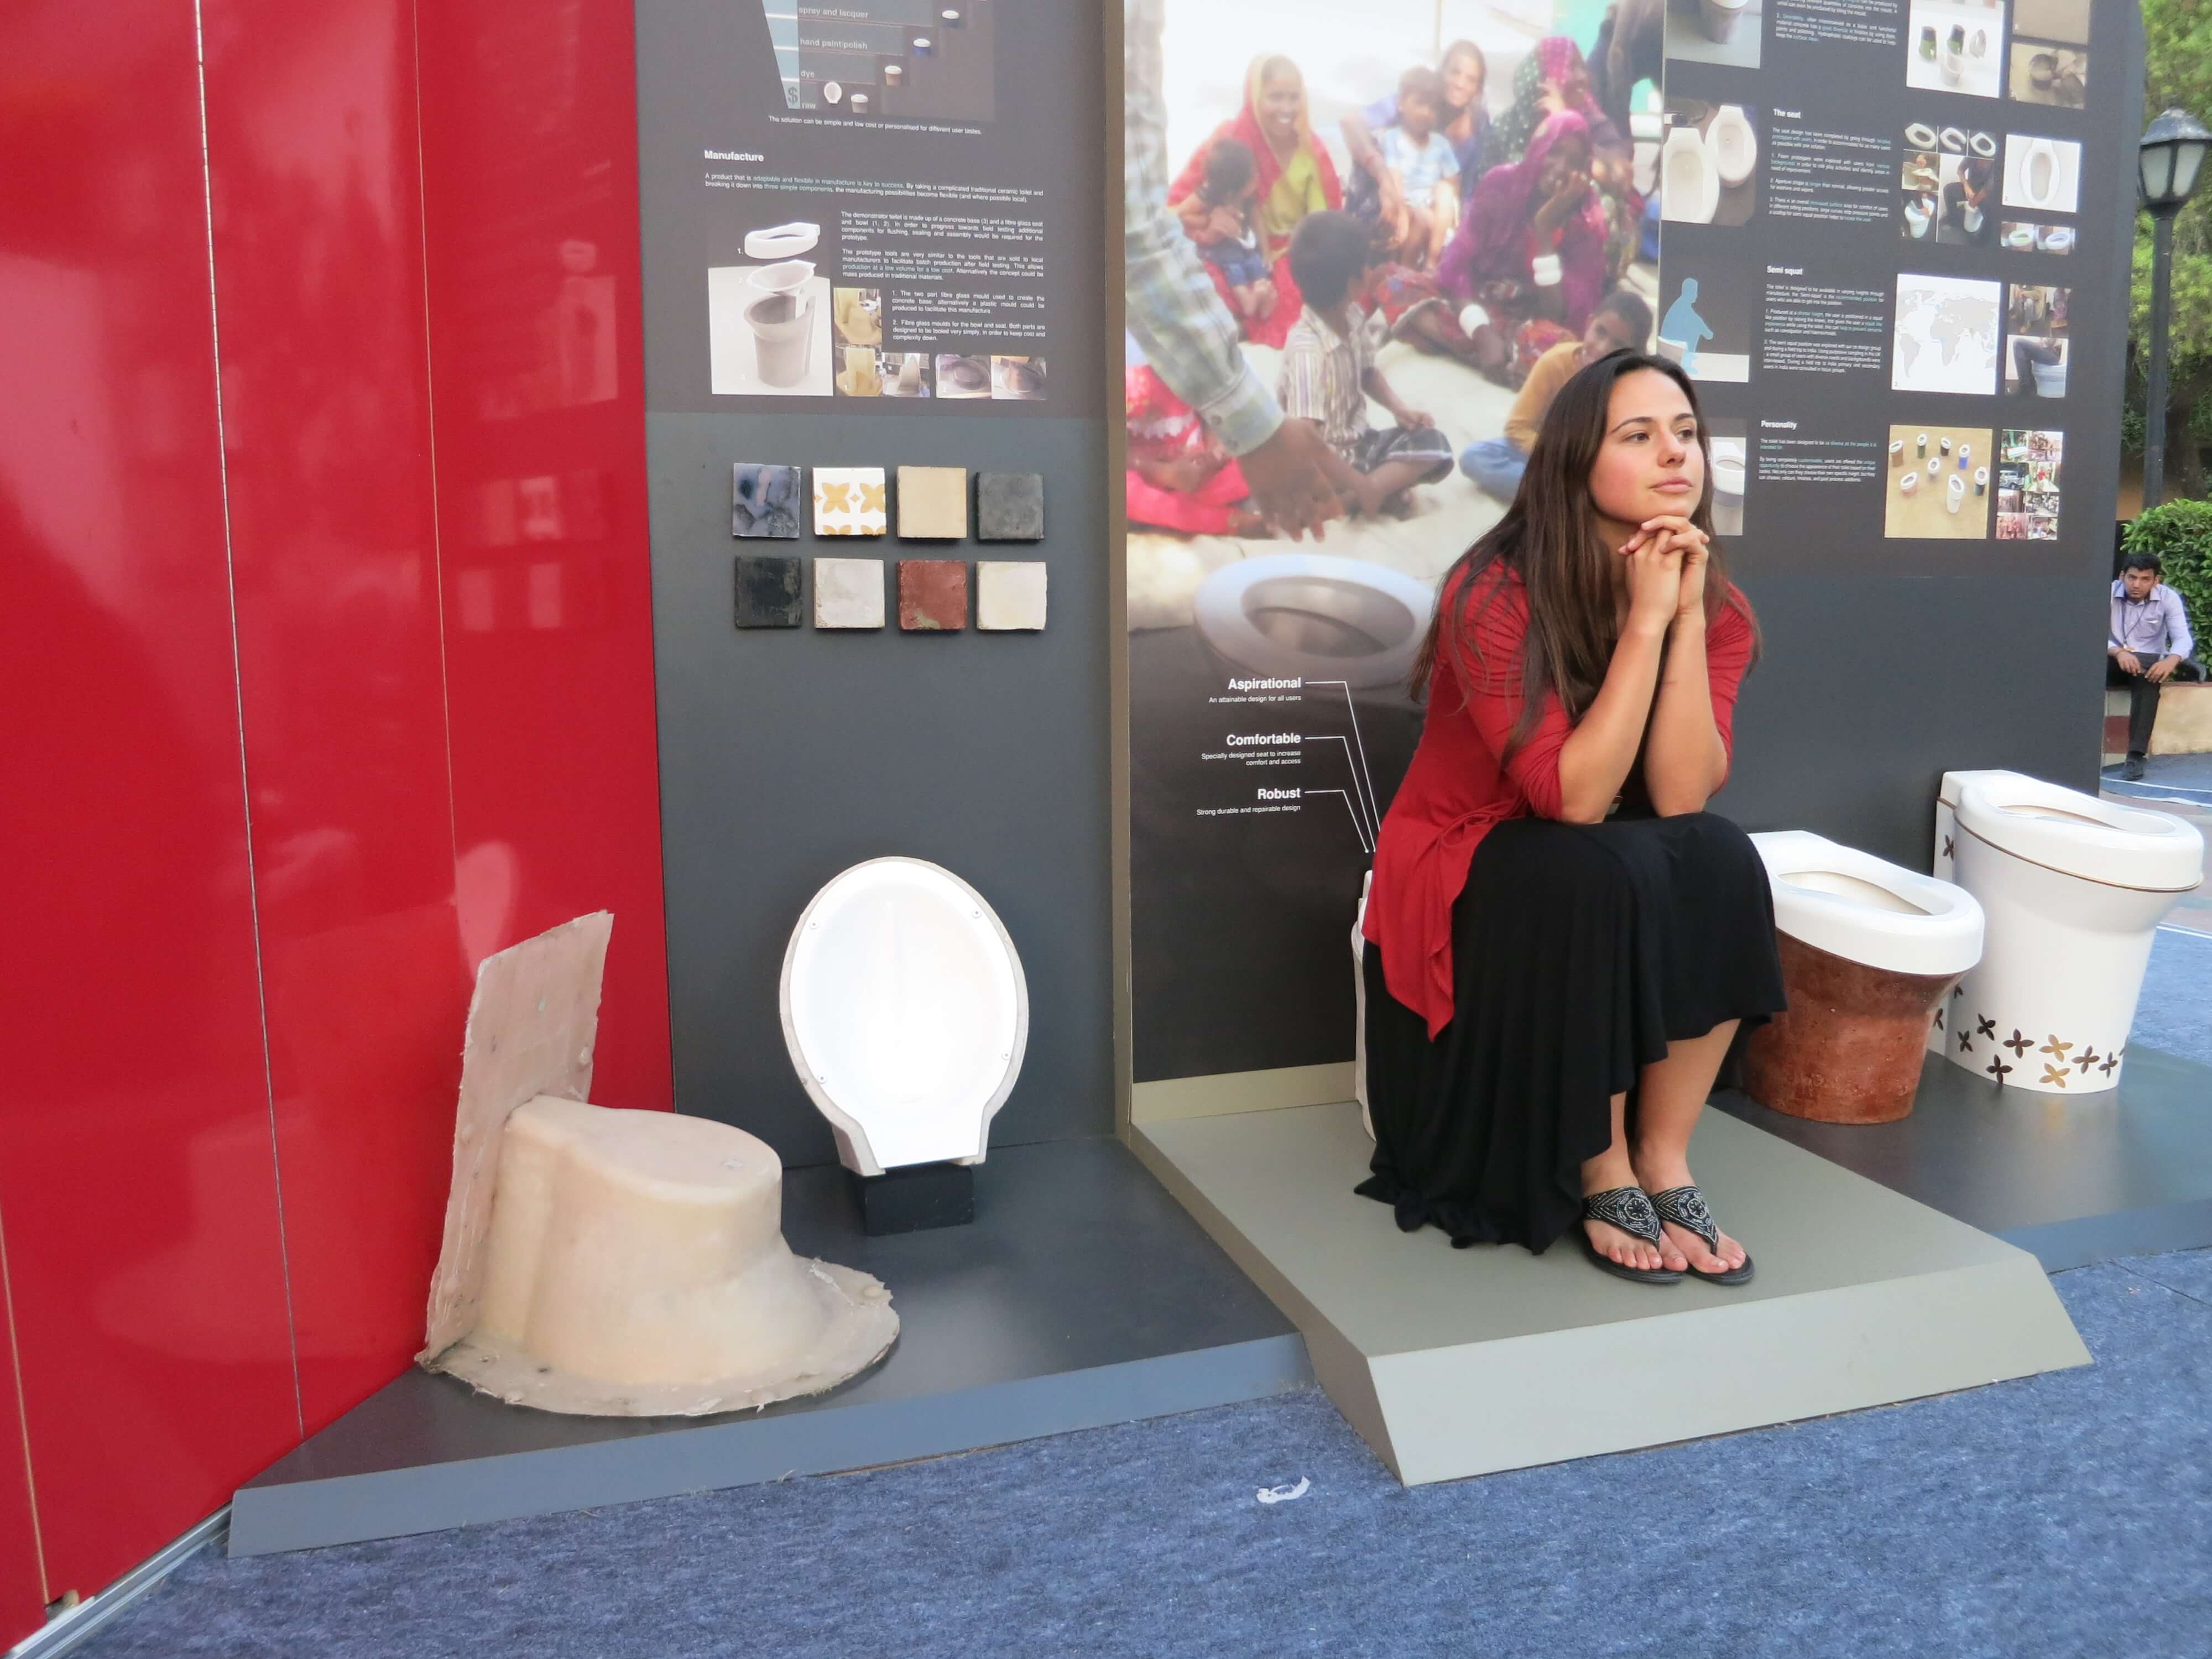 Still from Mister Toilet: The World's #2 Man. A woman sits on one of four toilets on display within an outdoor gallery. She is fully clothed with her elbows on her thighs and hands under her chin.